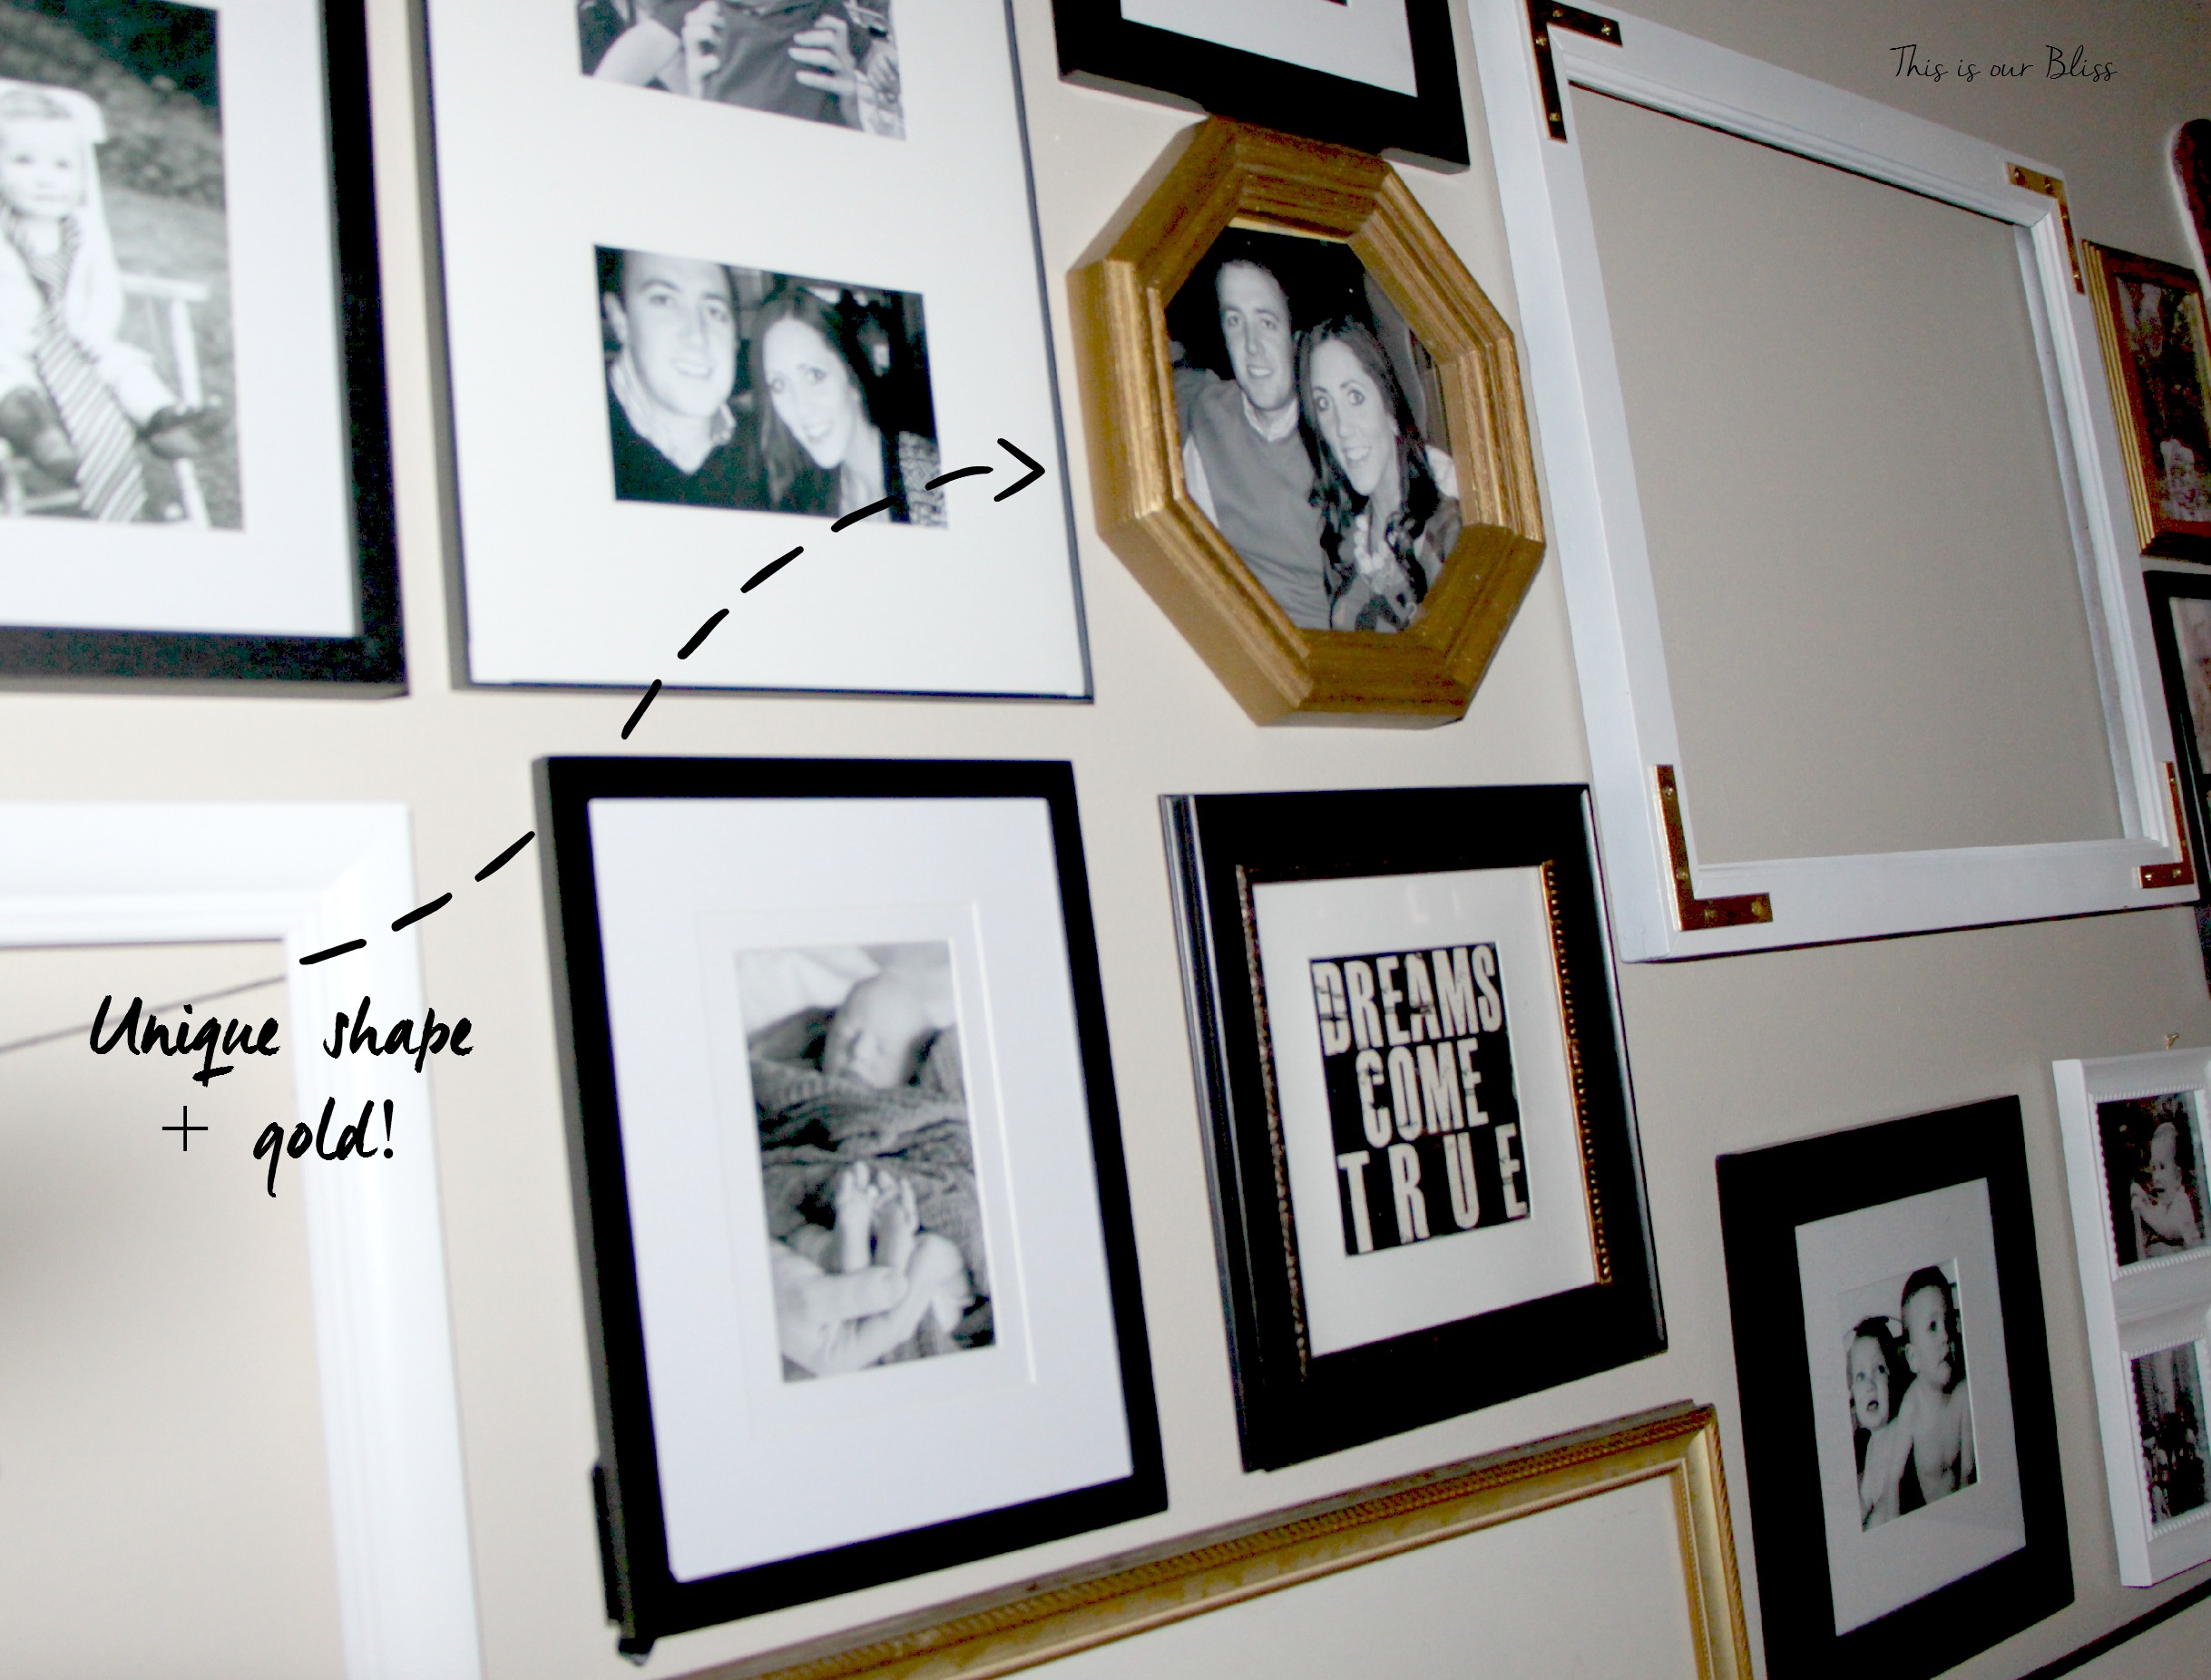 octagon thrifted frame - gallery wall - black white and gold - this is our bliss